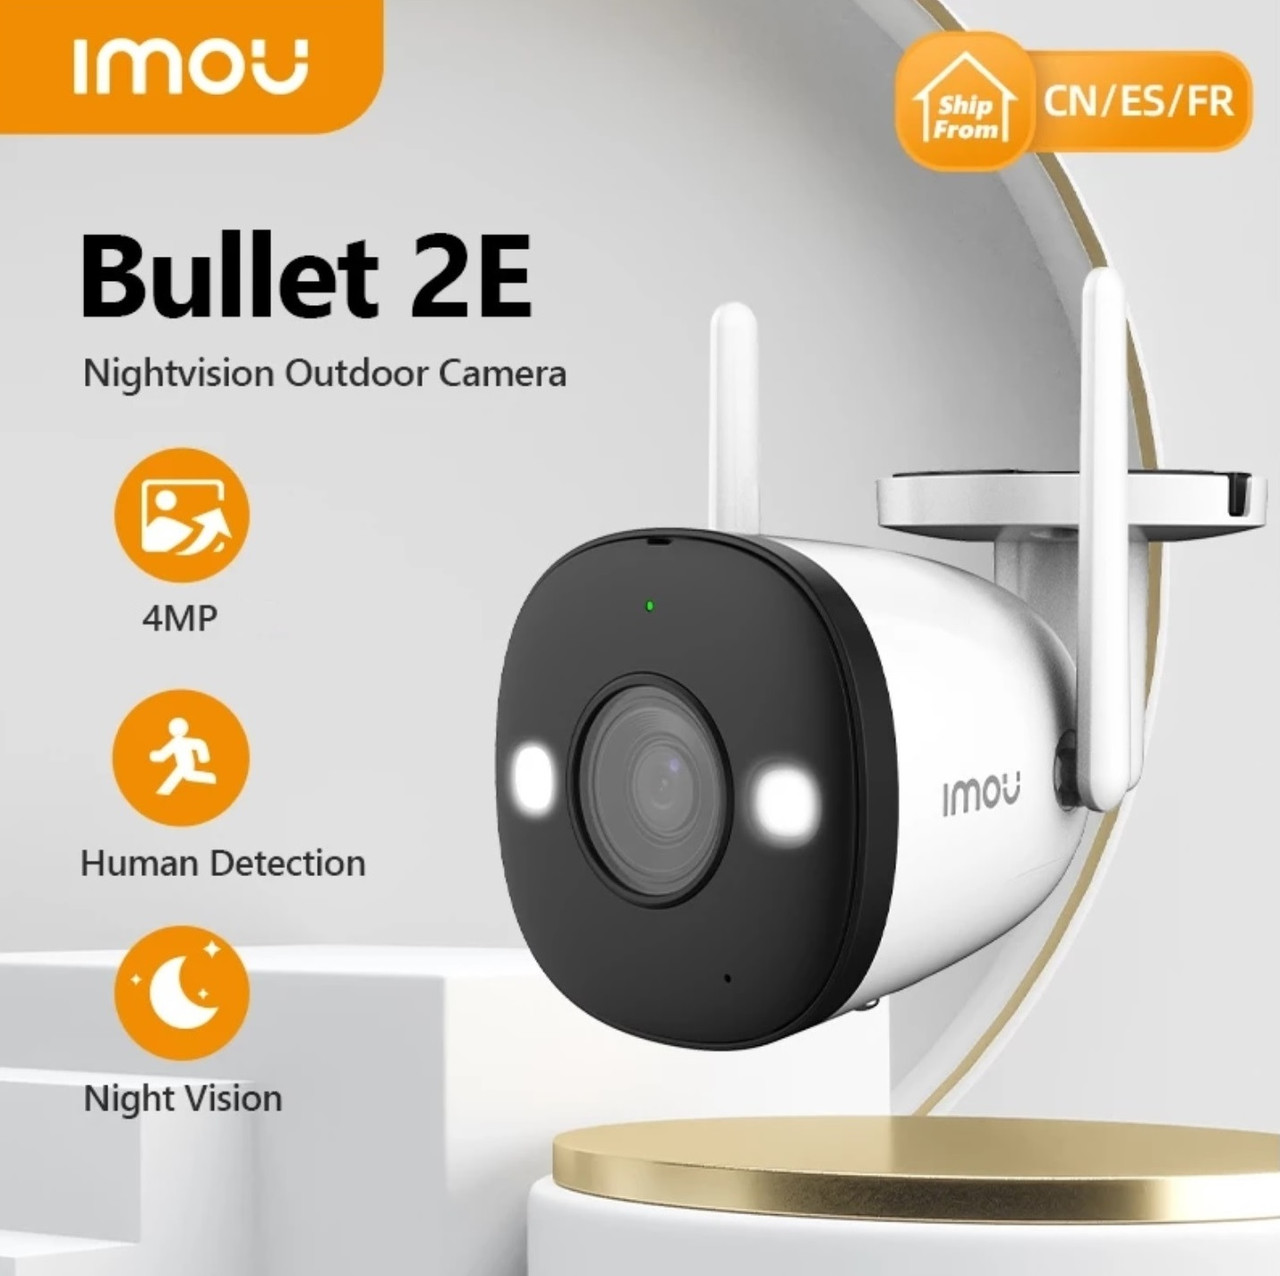 IP камера 4мп c WI-FI Imou Bullet 2E (IPC-F42FP) - Full color